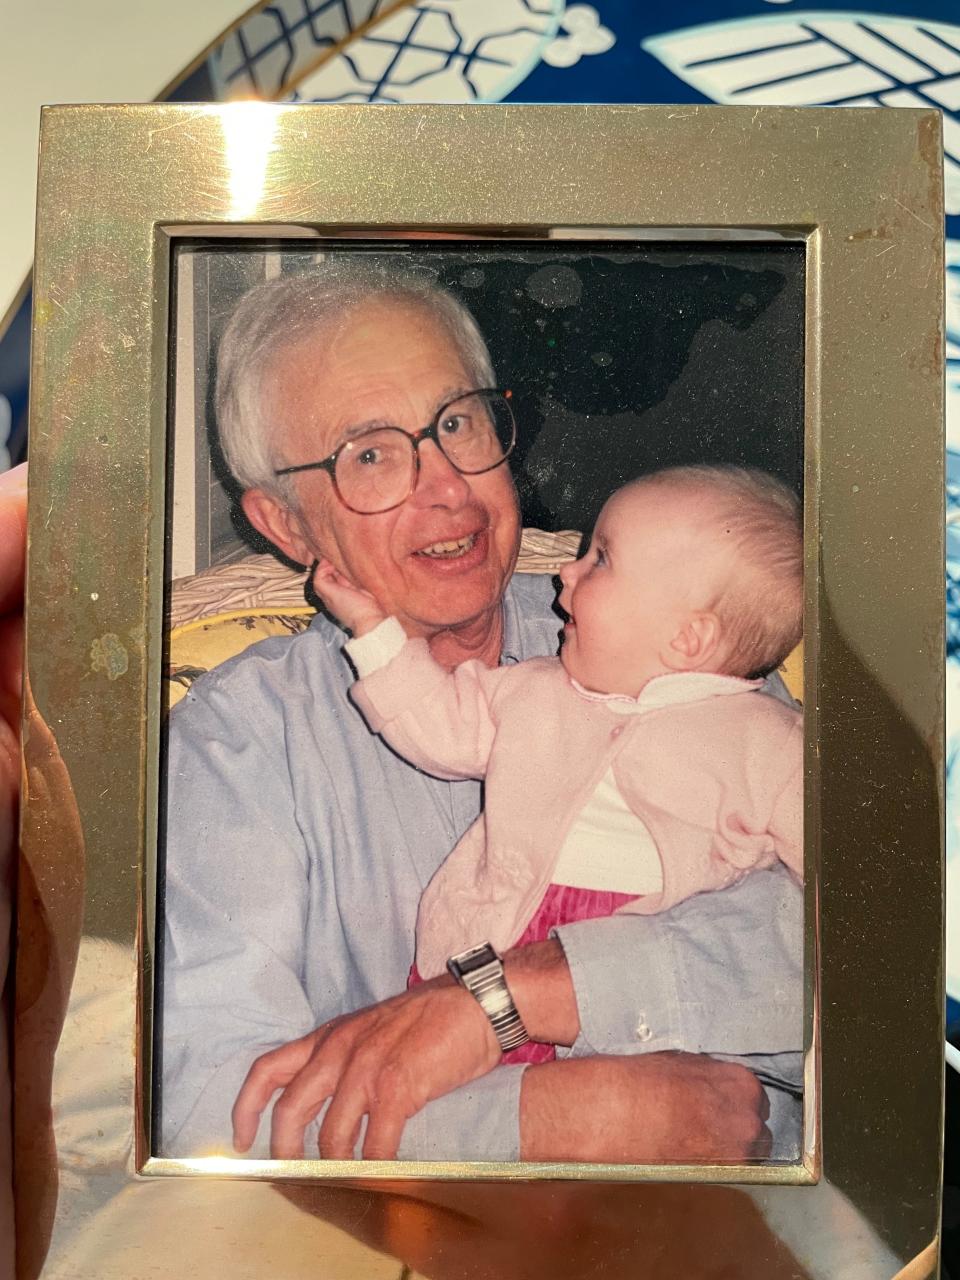 n this undated photo, Carl Sorenson III holds his smiling granddaughter, Isabel, when she was a baby.